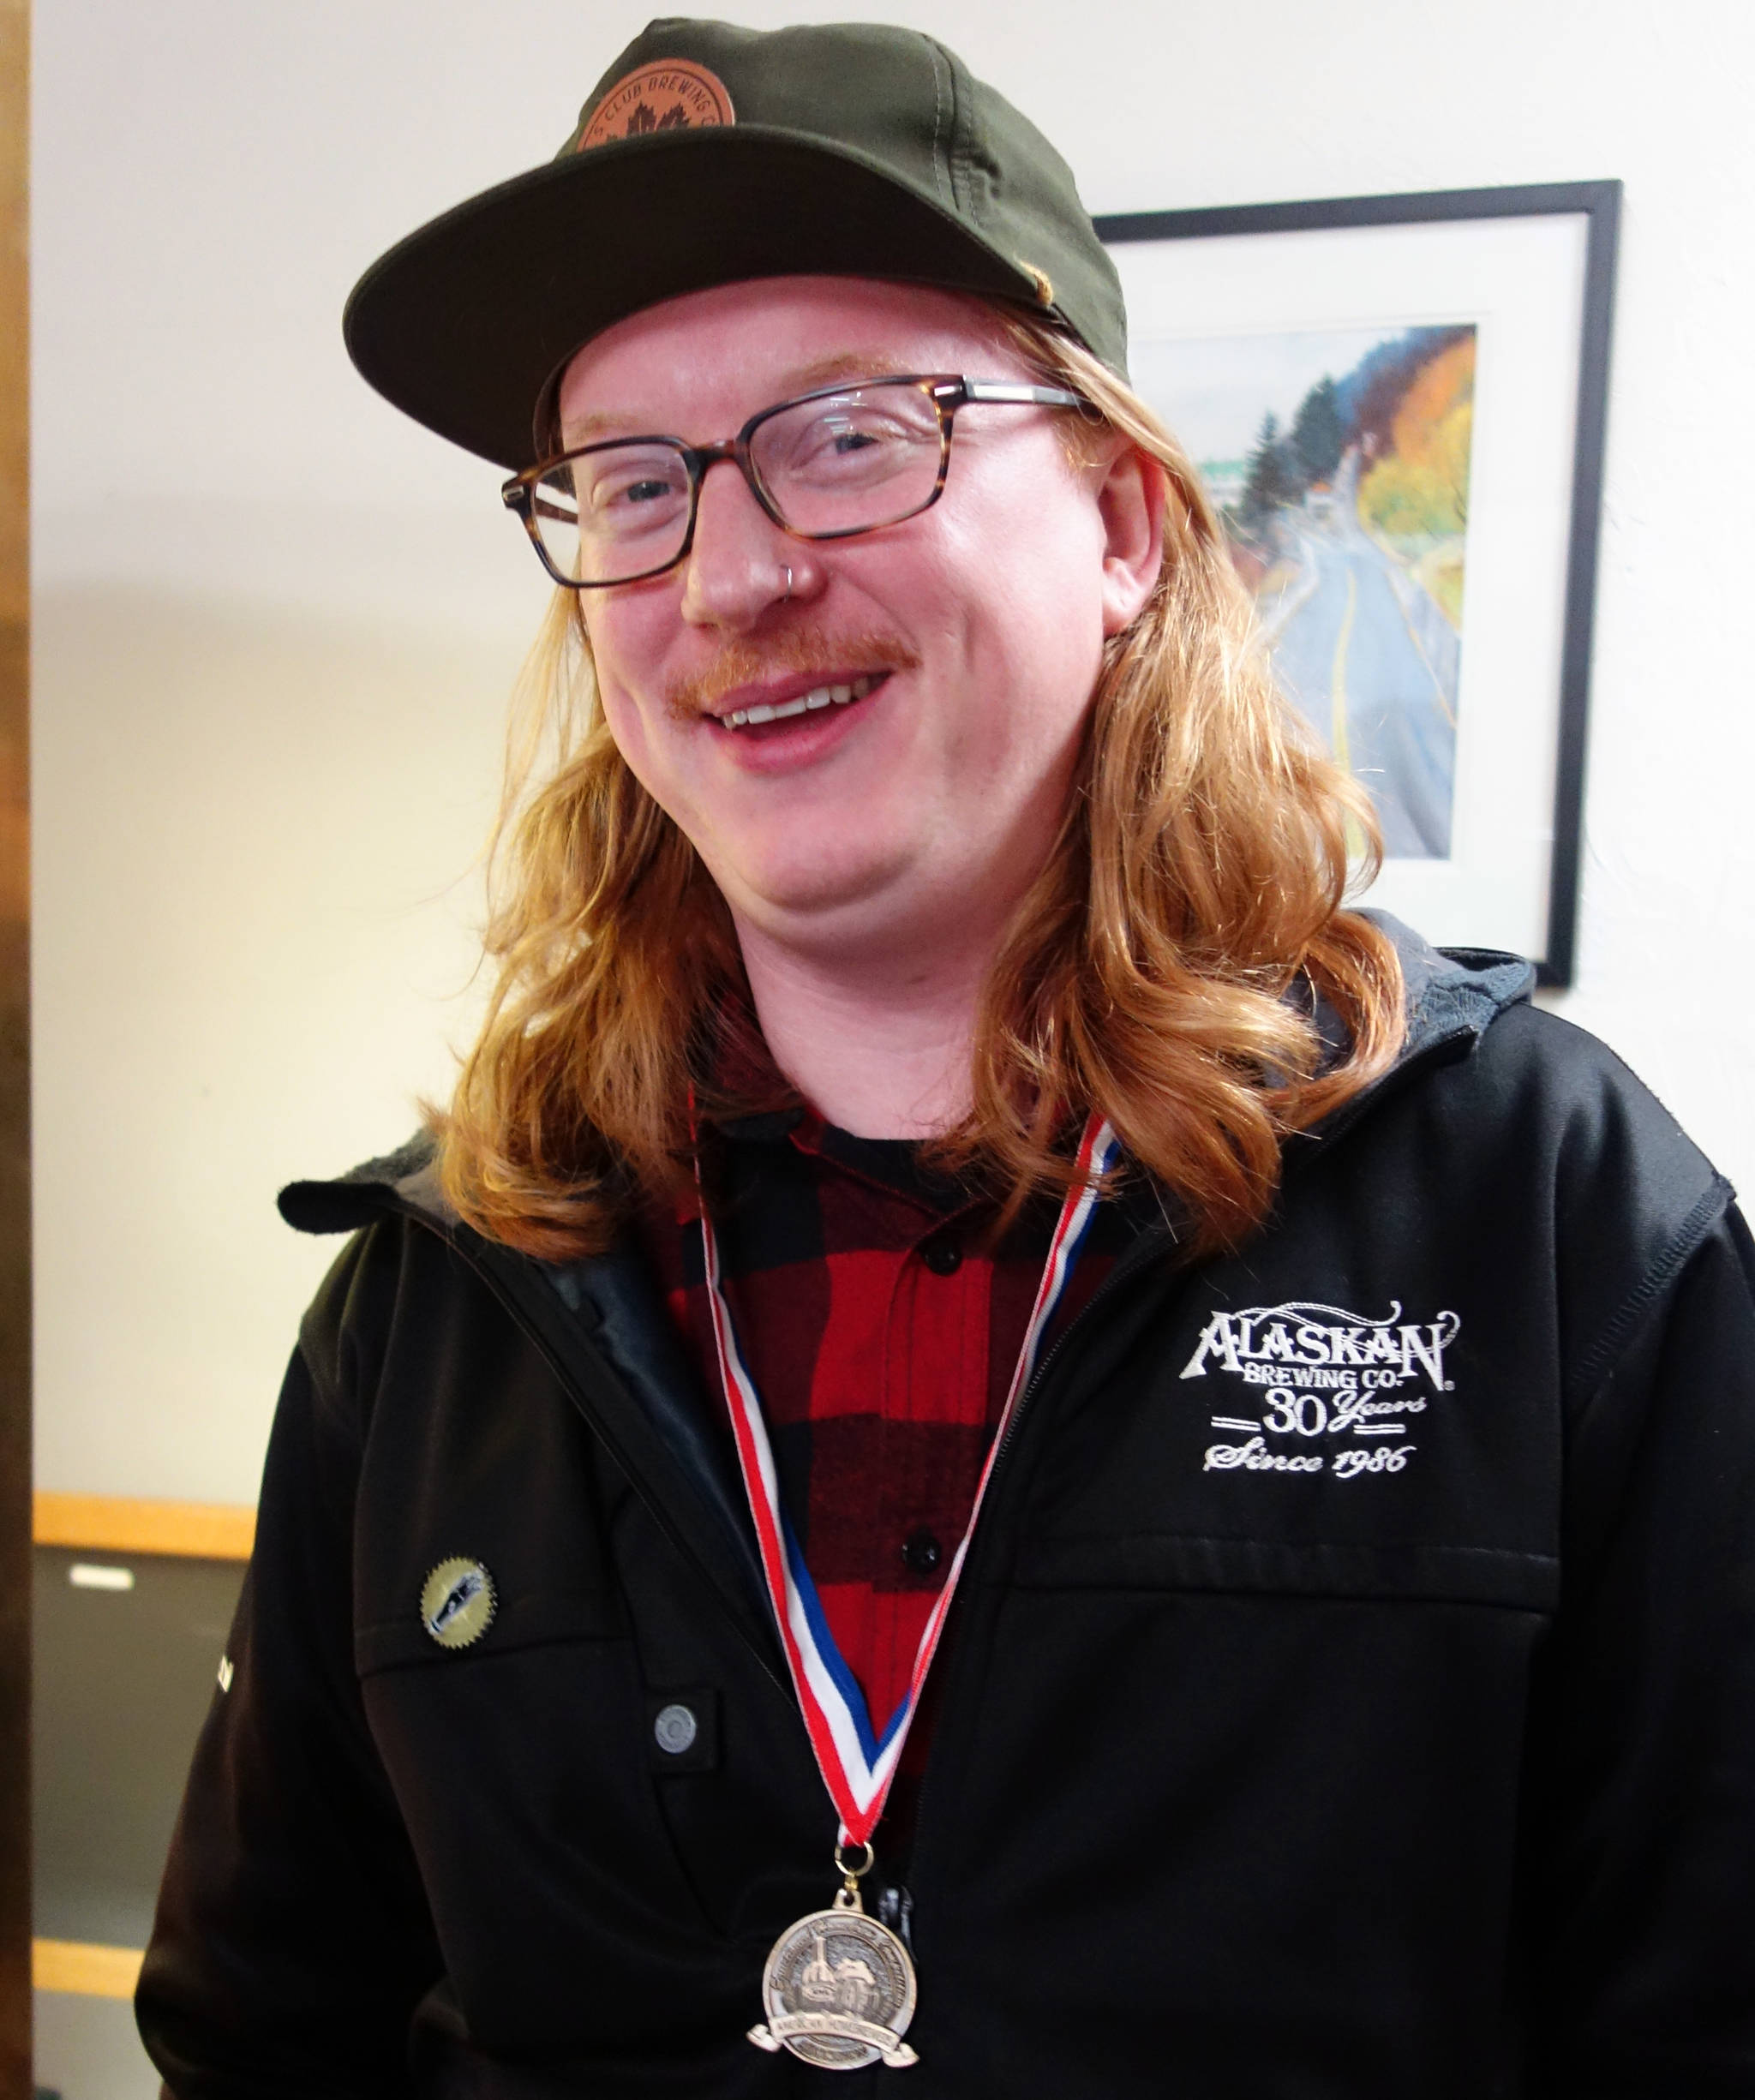 Kent Ficek, a Juneau homebrewer, smiles after tying for best in show in the Alaskan Homebrewing Competition, Oct. 12, 2019. The competition’s results were announced during AKtoberfest. (Ben Hohenstatt | Juneau Empire)